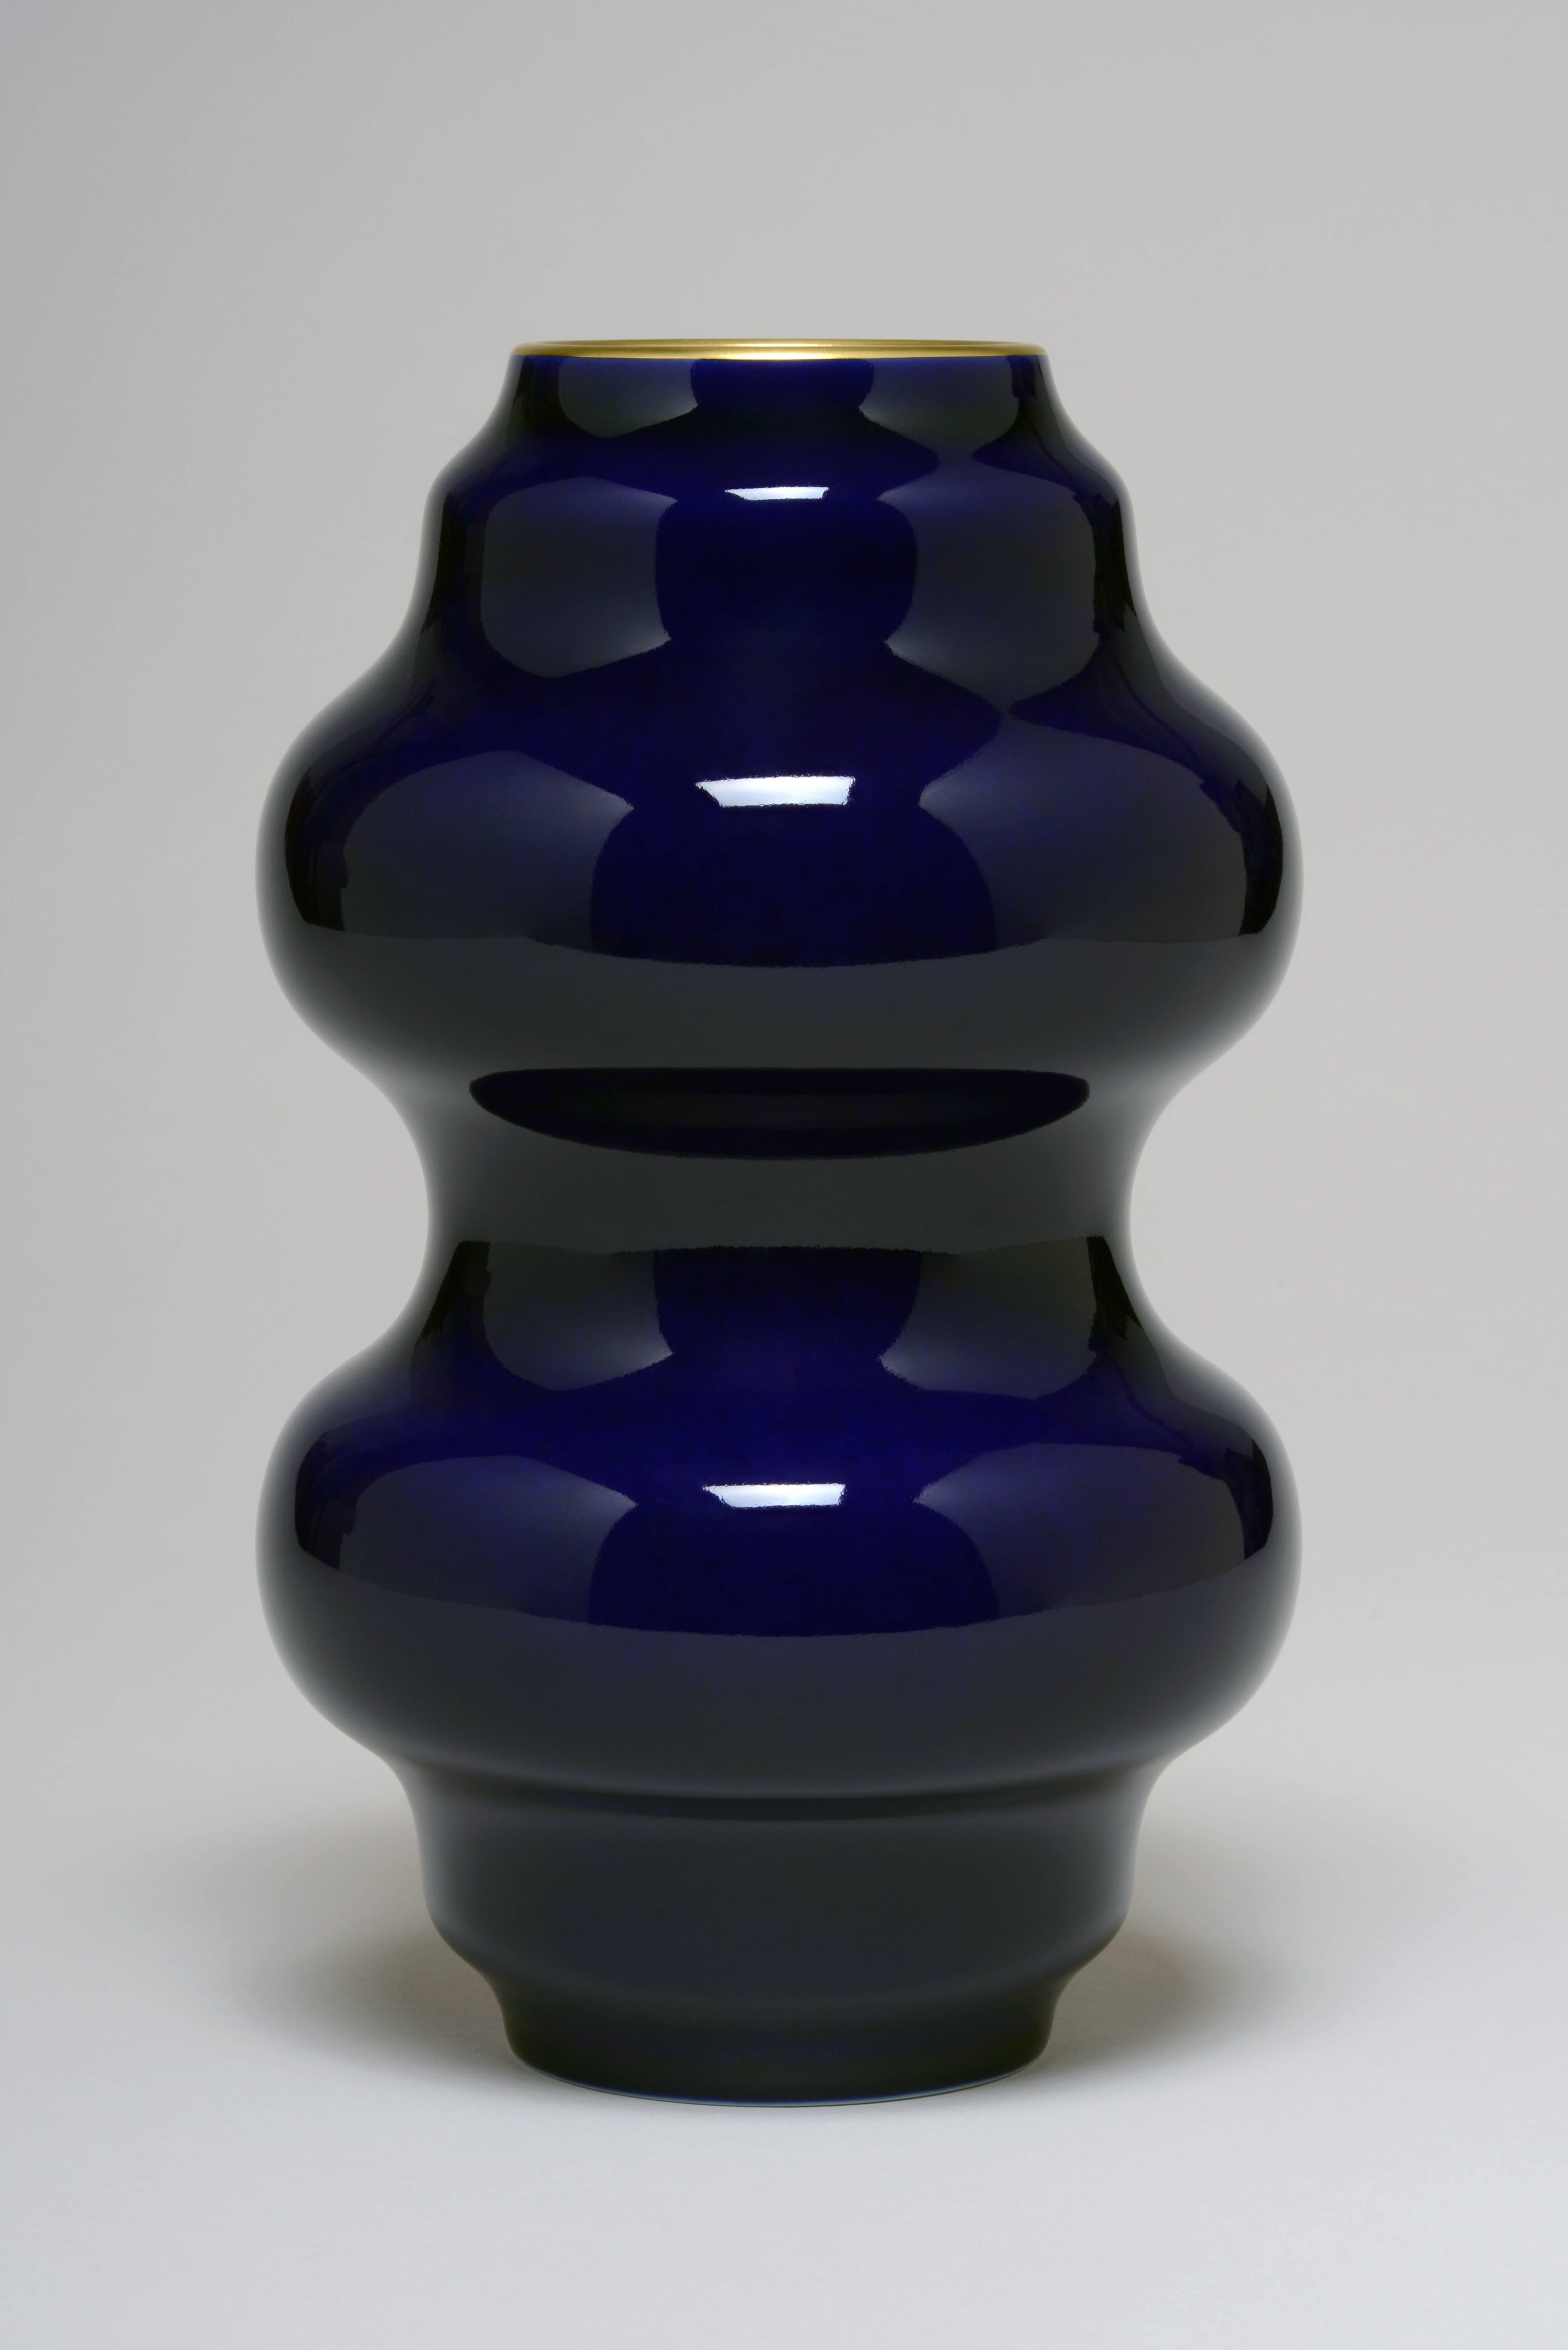 In 2011, Sèvres – Cité de la céramique ordered from François Dumas the creation of new shapes of vases, destined to become part of Sèvres’ collections. Dumas created four new vase shapes of great simplicity and sinuous lines, resembling a stack of